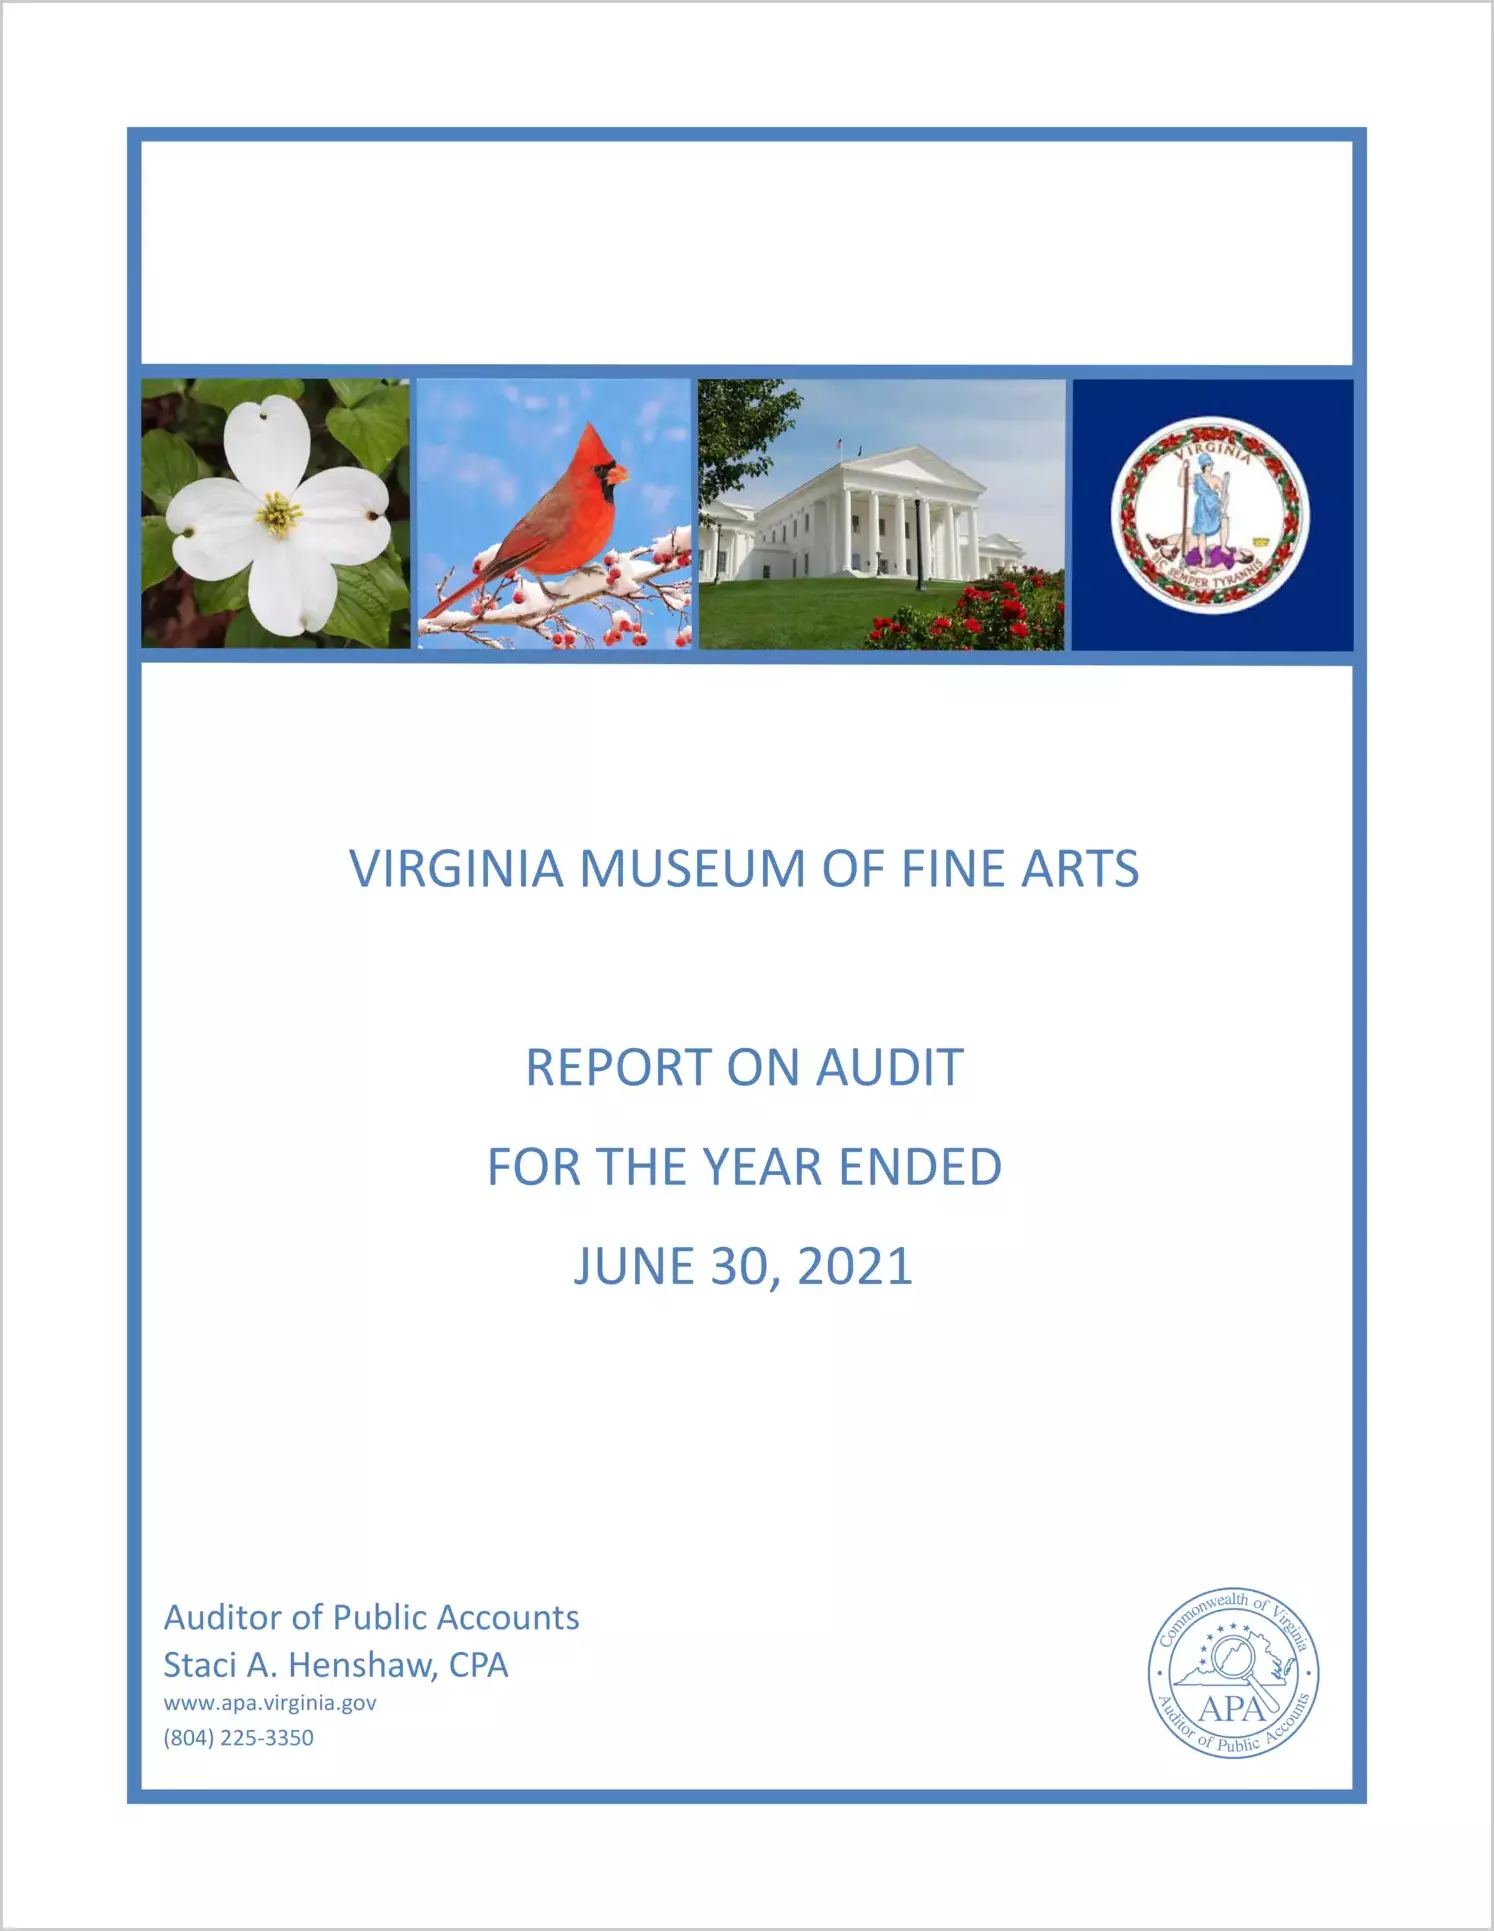 Virginia Museum of Fine Arts for the year ended June 30, 2021